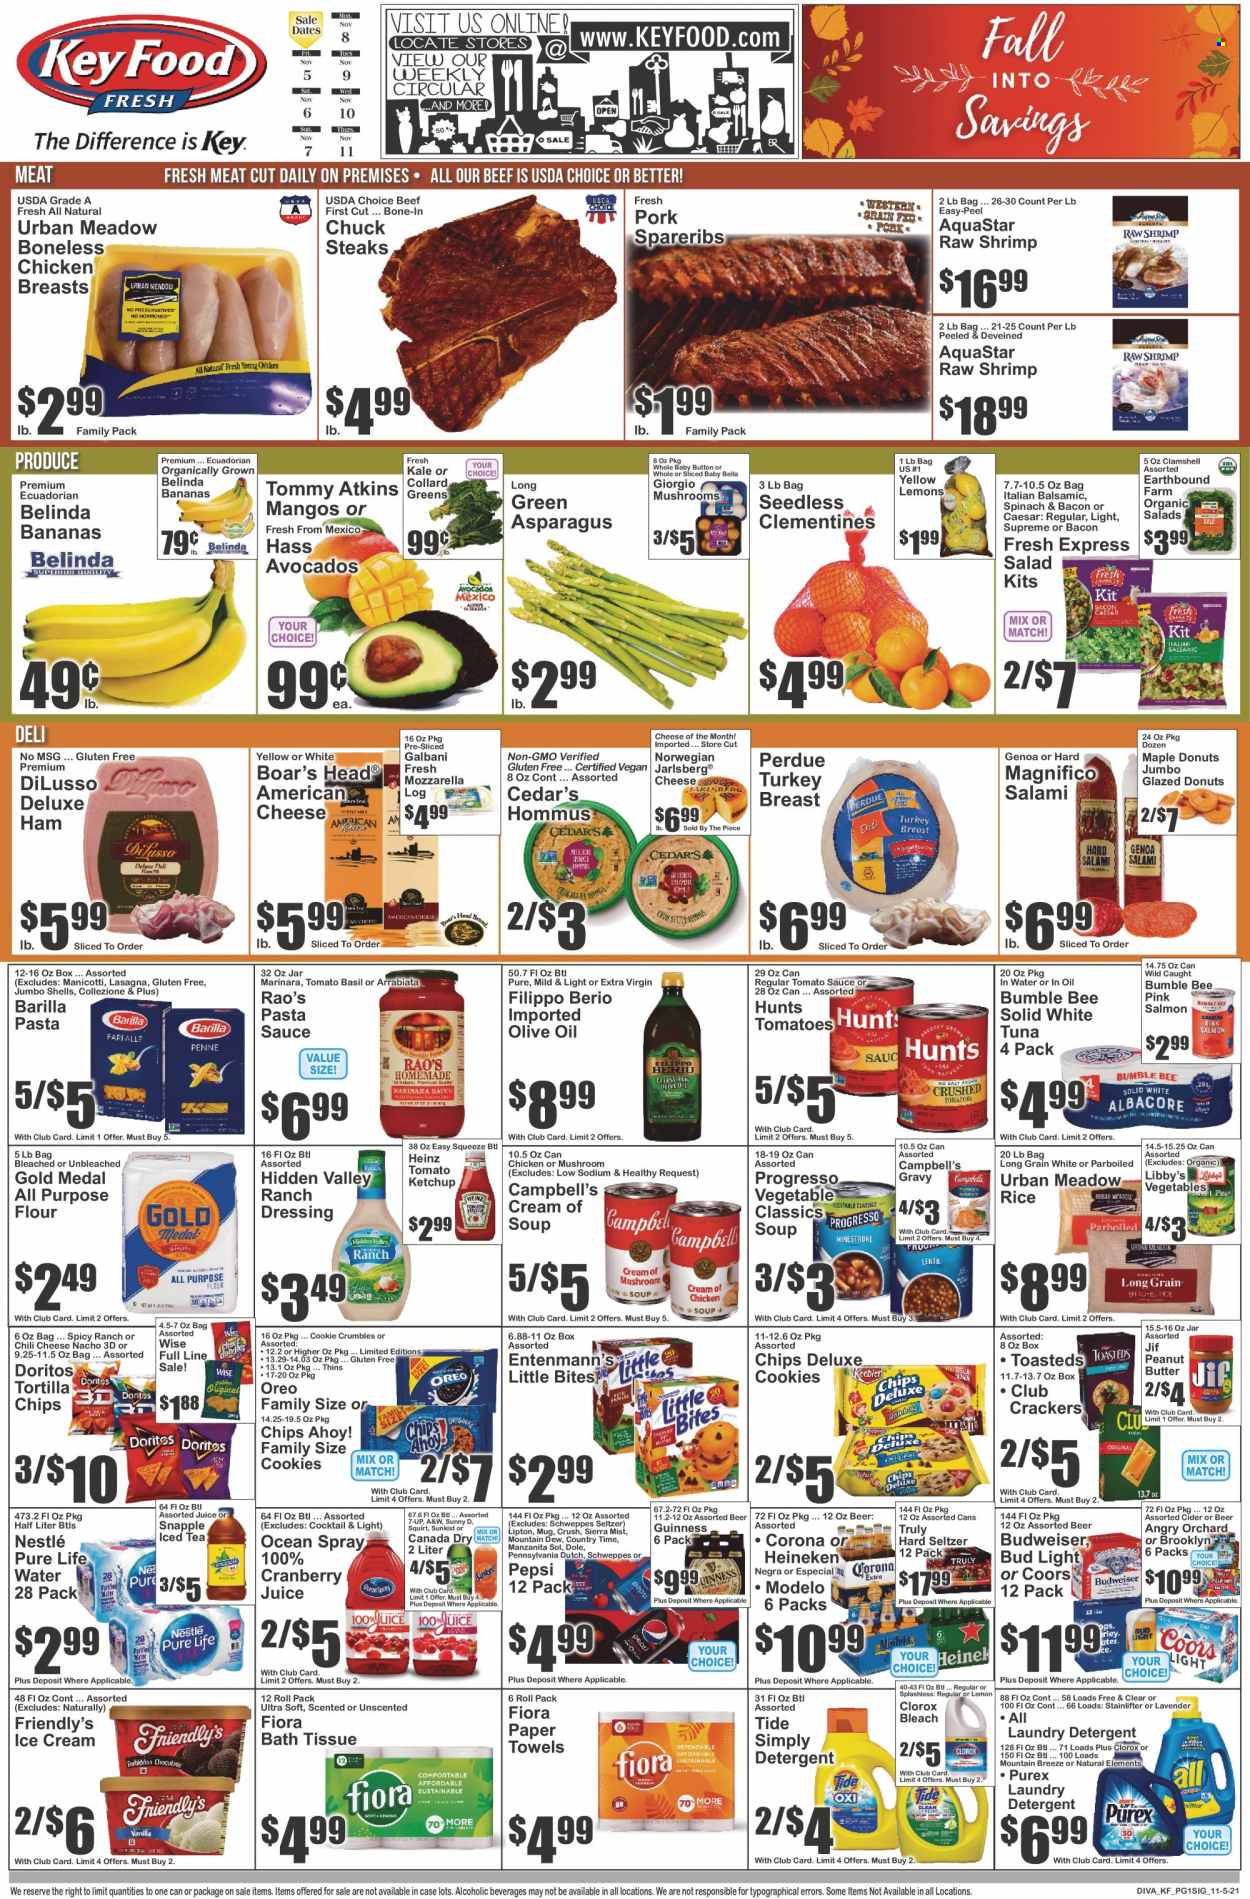 thumbnail - Key Food Flyer - 11/05/2021 - 11/11/2021 - Sales products - donut, Entenmann's, asparagus, collard greens, kale, salad, Dole, avocado, salmon, tuna, shrimps, Campbell's, pasta sauce, soup, Bumble Bee, Barilla, Progresso, lasagna meal, Perdue®, bacon, salami, ham, hummus, american cheese, mozzarella, Galbani, Oreo, ranch dressing, ice cream, Friendly's Ice Cream, cookies, Nestlé, crackers, Chips Ahoy!, Little Bites, Doritos, tortilla chips, chips, Thins, all purpose flour, tomato sauce, Heinz, rice, esponja, ketchup, dressing, extra virgin olive oil, olive oil, peanut butter, Jif, Canada Dry, cranberry juice, Mountain Dew, Schweppes, Pepsi, juice, Lipton, ice tea, 7UP, Snapple, A&W, Sierra Mist, Country Time, Pure Life Water, Hard Seltzer, TRULY, cider, beer, Bud Light, Corona Extra, Heineken, Guinness, Modelo, turkey breast, chicken breasts, steak, pork spare ribs, bath tissue, kitchen towels, paper towels, detergent, bleach, Clorox, Tide, laundry detergent, Purex, mug, Budweiser, clementines, Coors. Page 1.